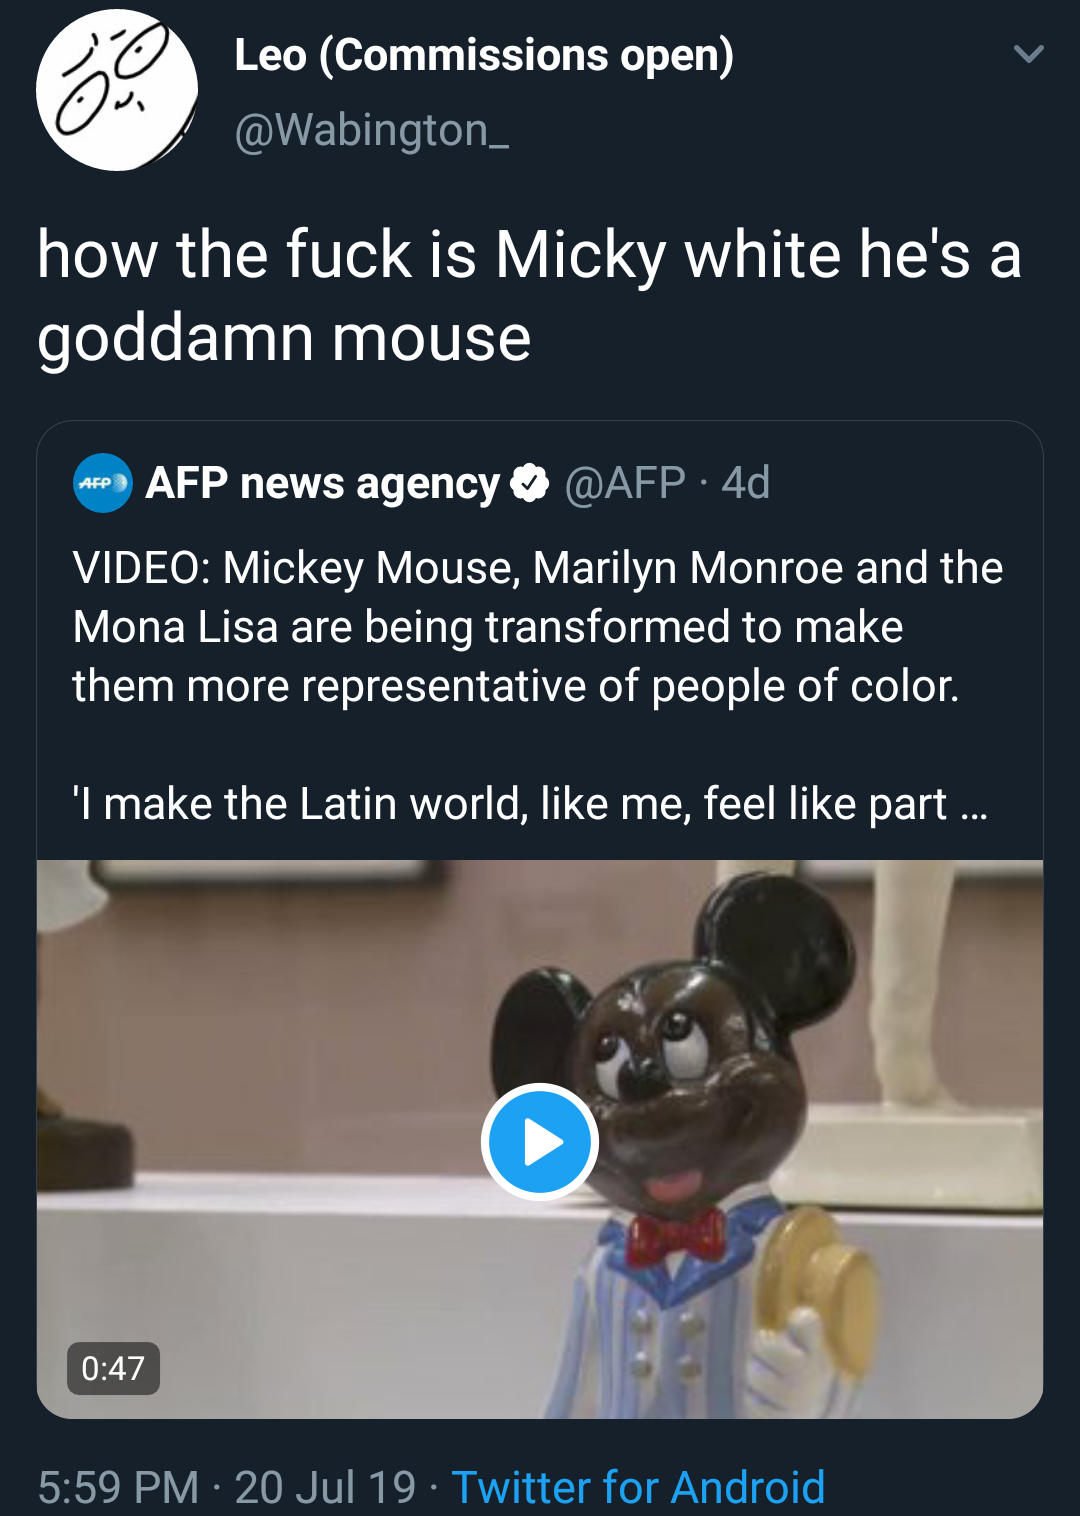 Leo Commissions open how the fuck is Micky white he's a goddamn mouse Afp news agency Qafp.4d Video Mickey Mouse, Marilyn Monroe and the Mona Lisa are being transformed to make them more representative of people of color. "I make the Latin world, me, feel